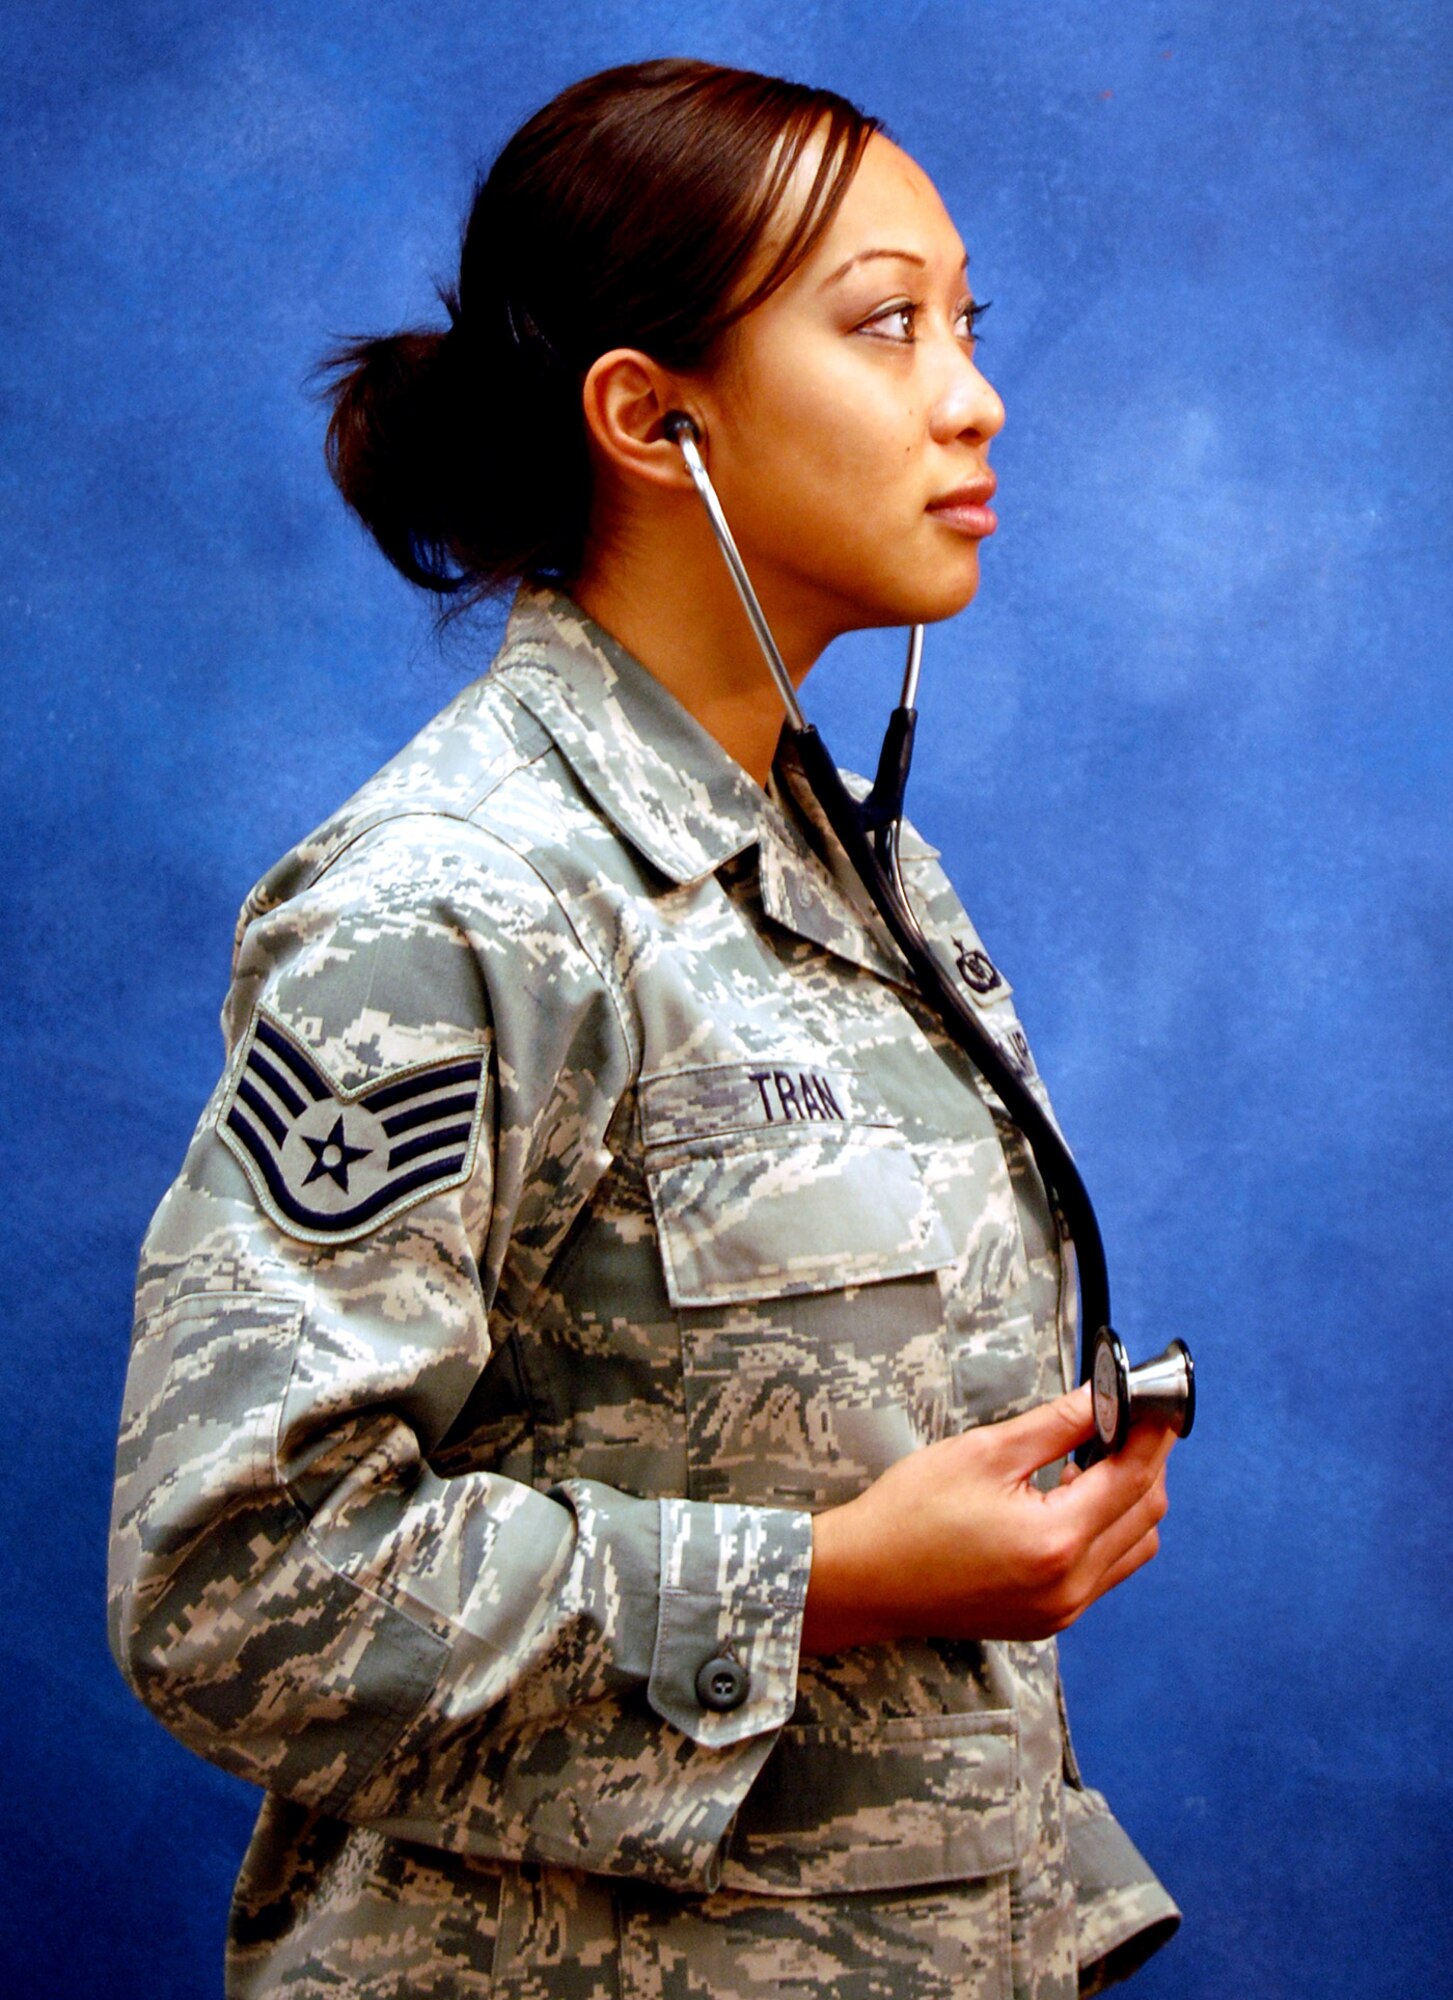 Staff Sgt. Hoang Tran, instructor with the U.S. Air Force Expeditionary Center's Mobility Operations School, models for a photo Dec. 12, 2008, in the Expeditionary Center studio on Fort Dix, N.J.  The effort was part of preparatory work by an artist from the Air Force Art Program to complete a painting highlighting Expeditionary Center Airmen. (U.S. Air Force Photo/Nathan G. Bevier)